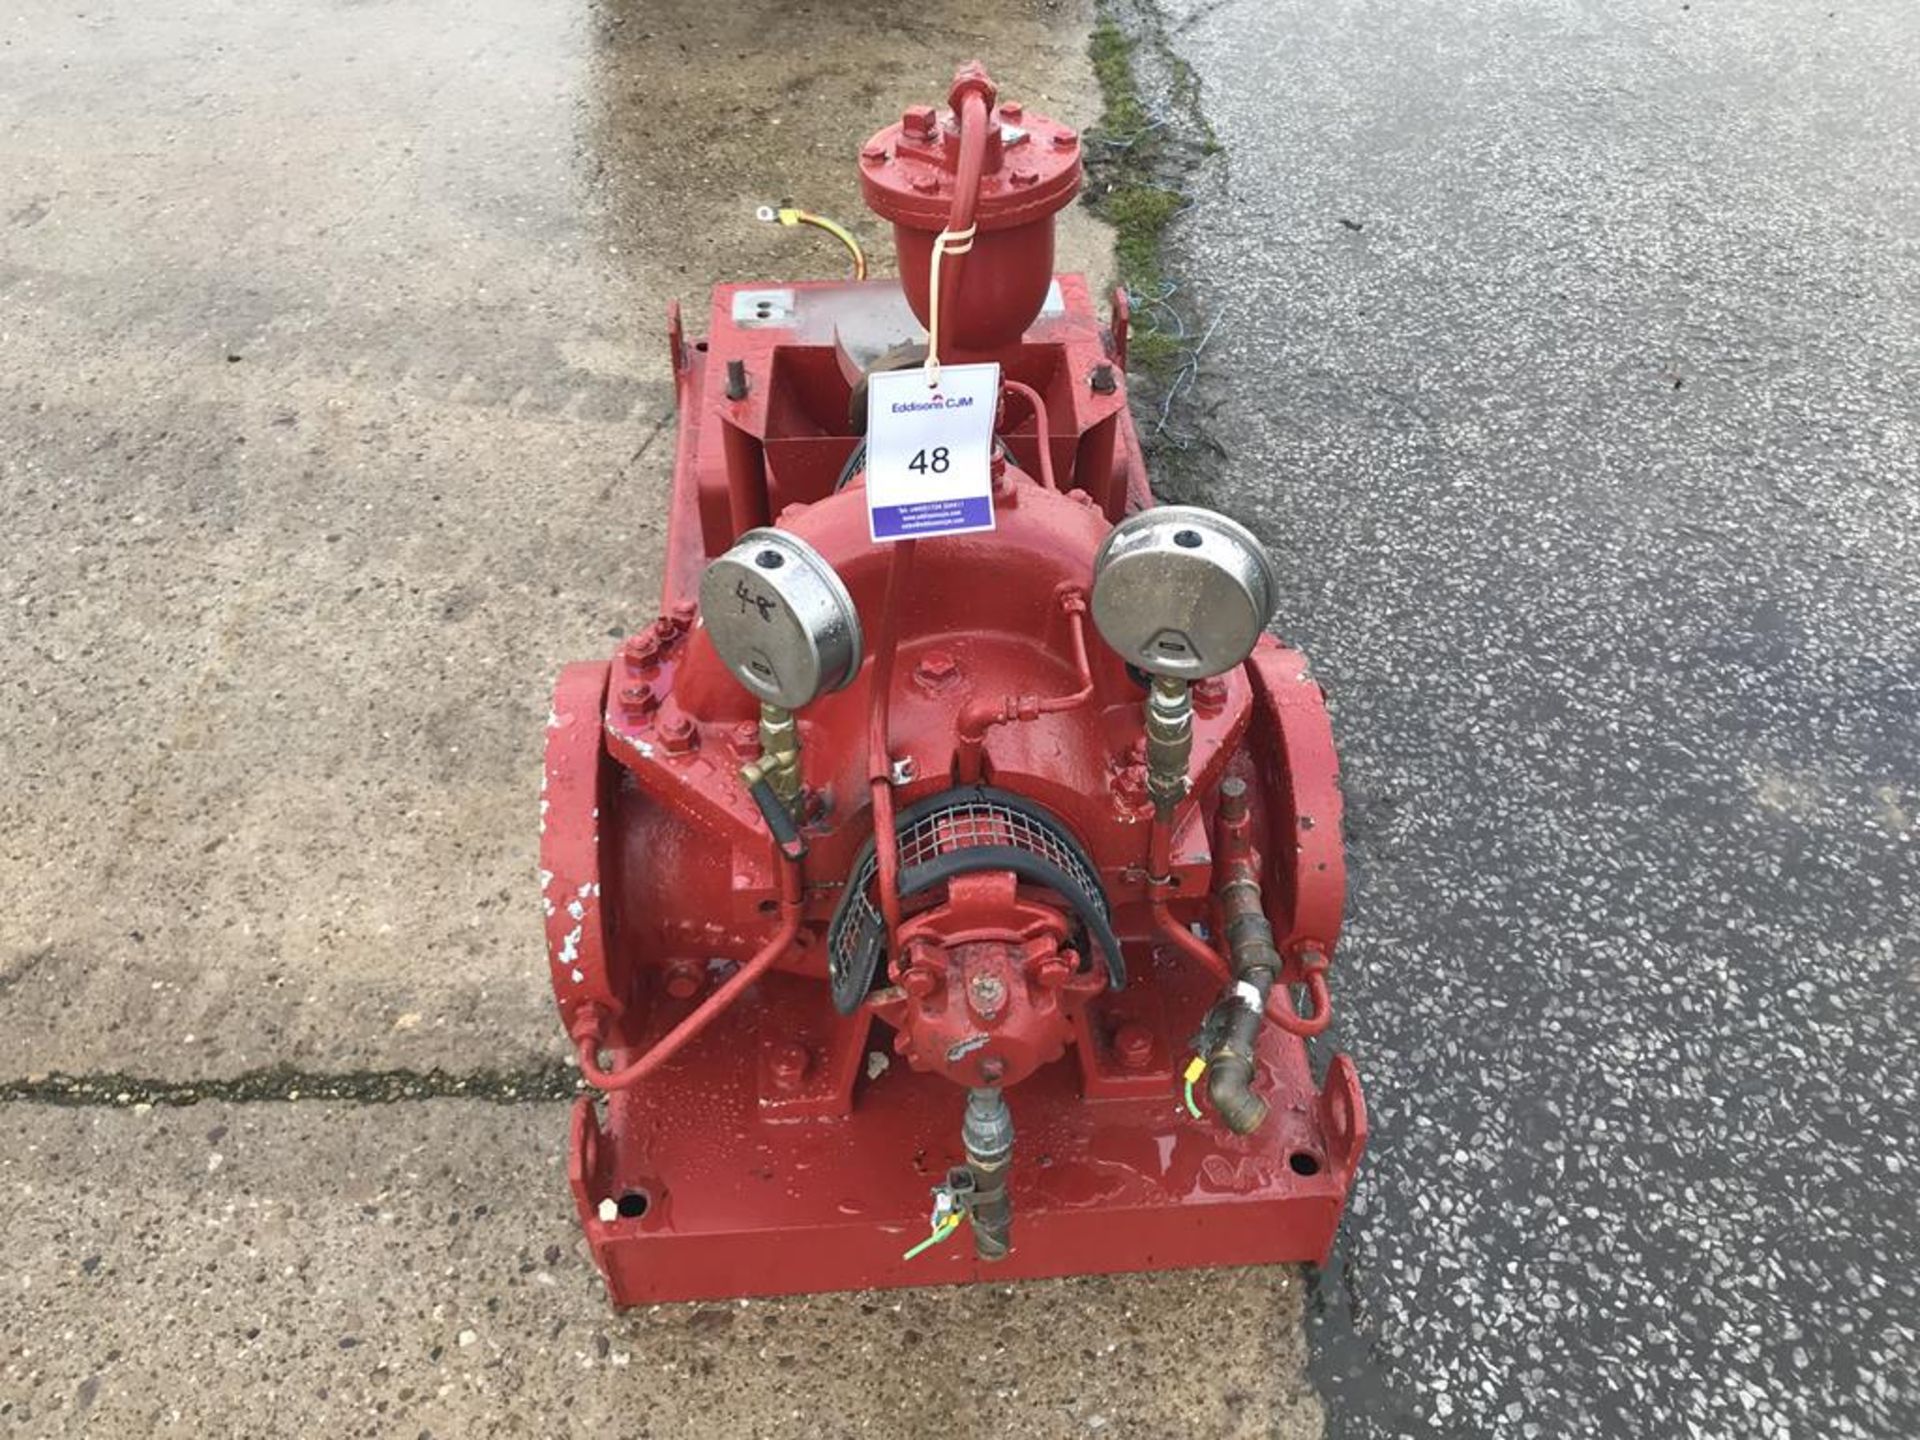 SPP SKID MOUNTED FIRE PUMP - Image 3 of 3